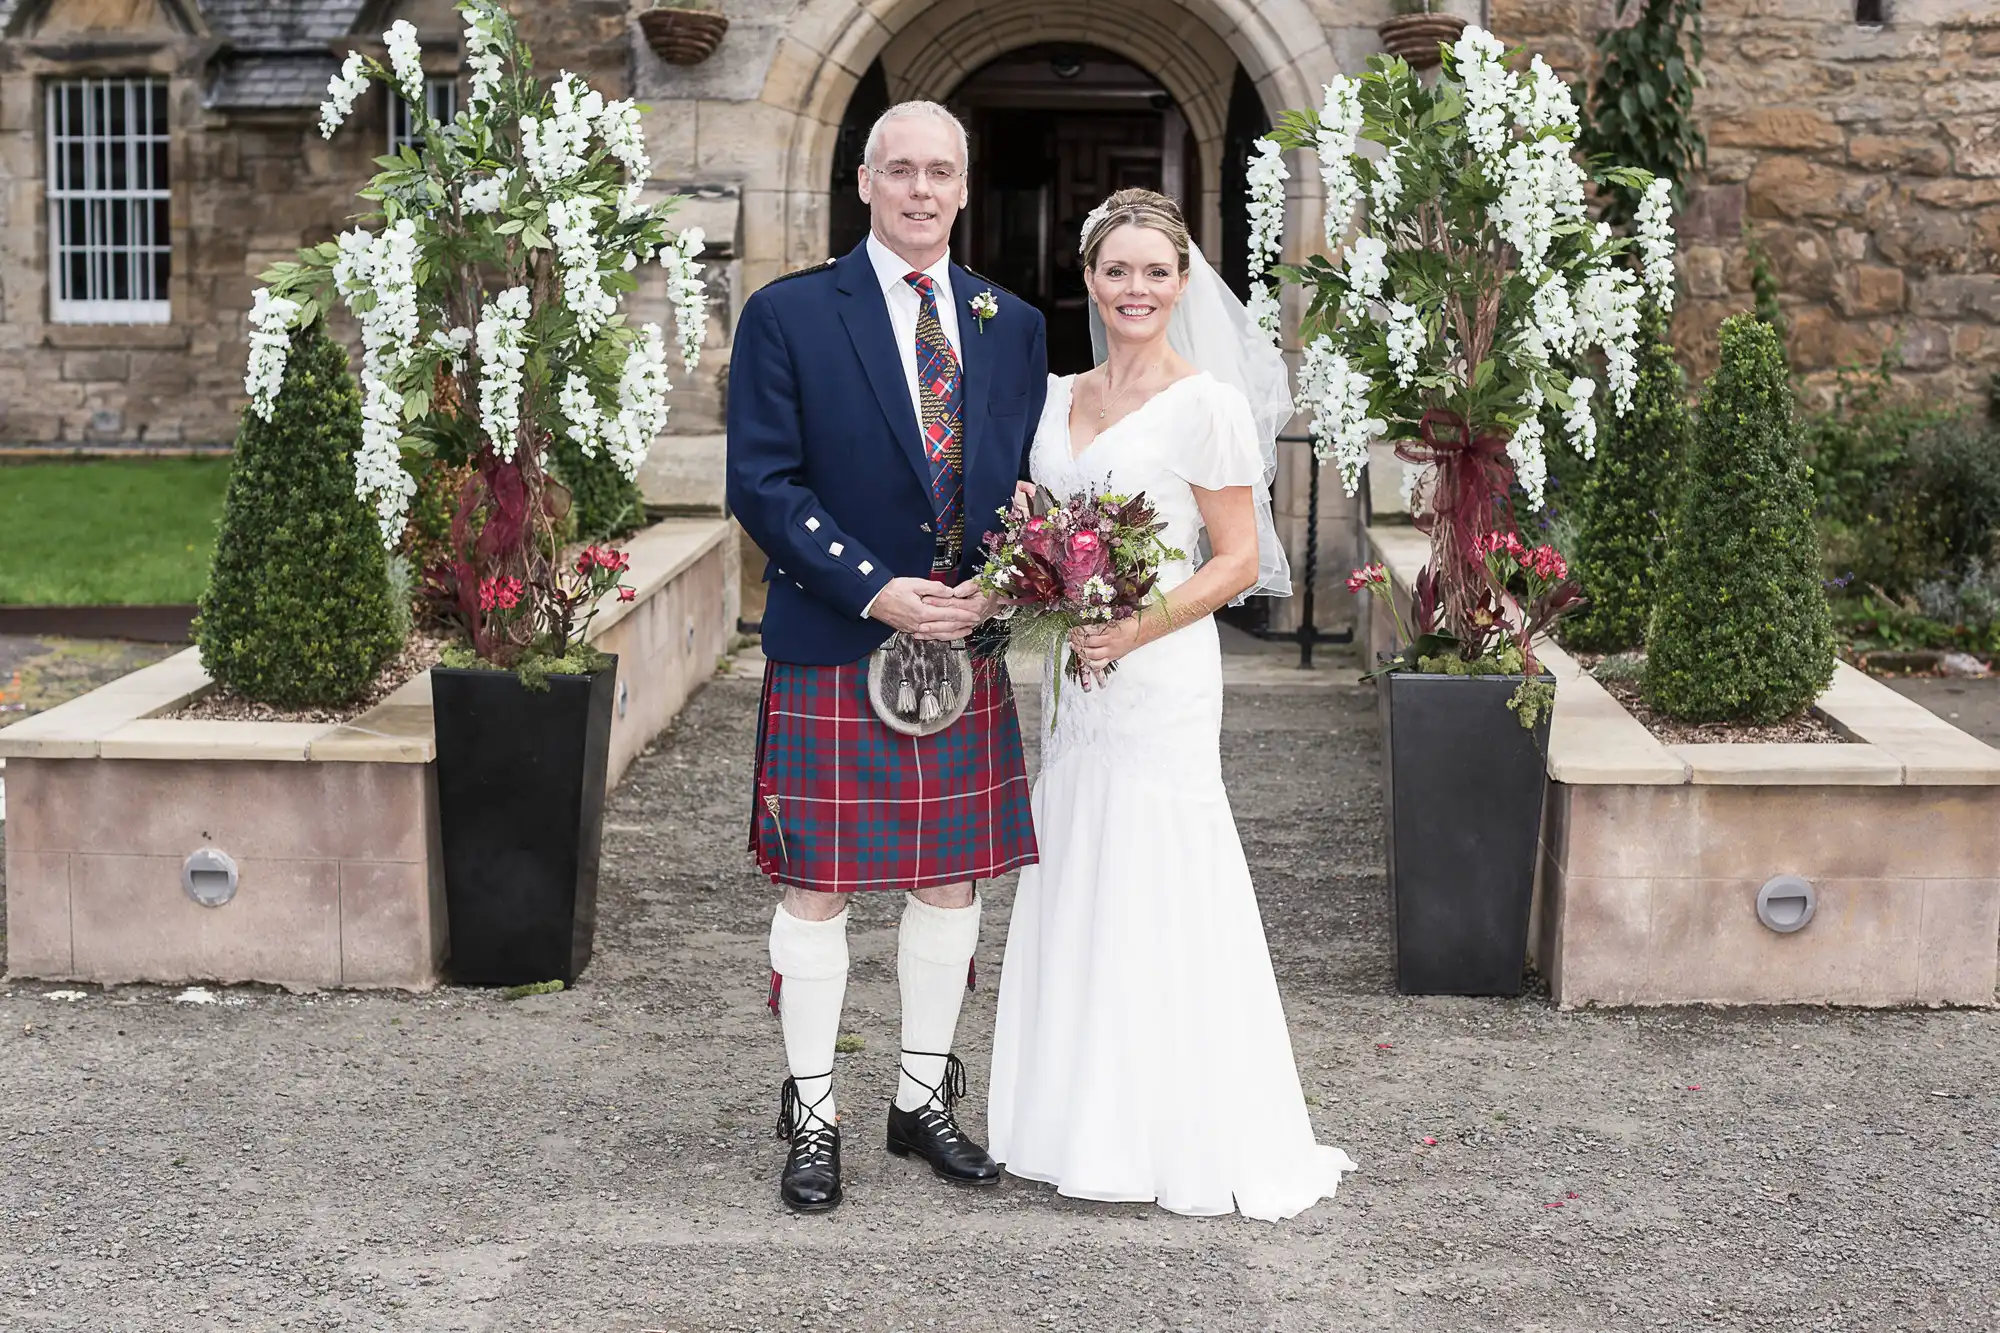 A bride and groom smiling in front of a stone building, with the groom wearing traditional scottish attire and the bride in a white dress, holding a bouquet.